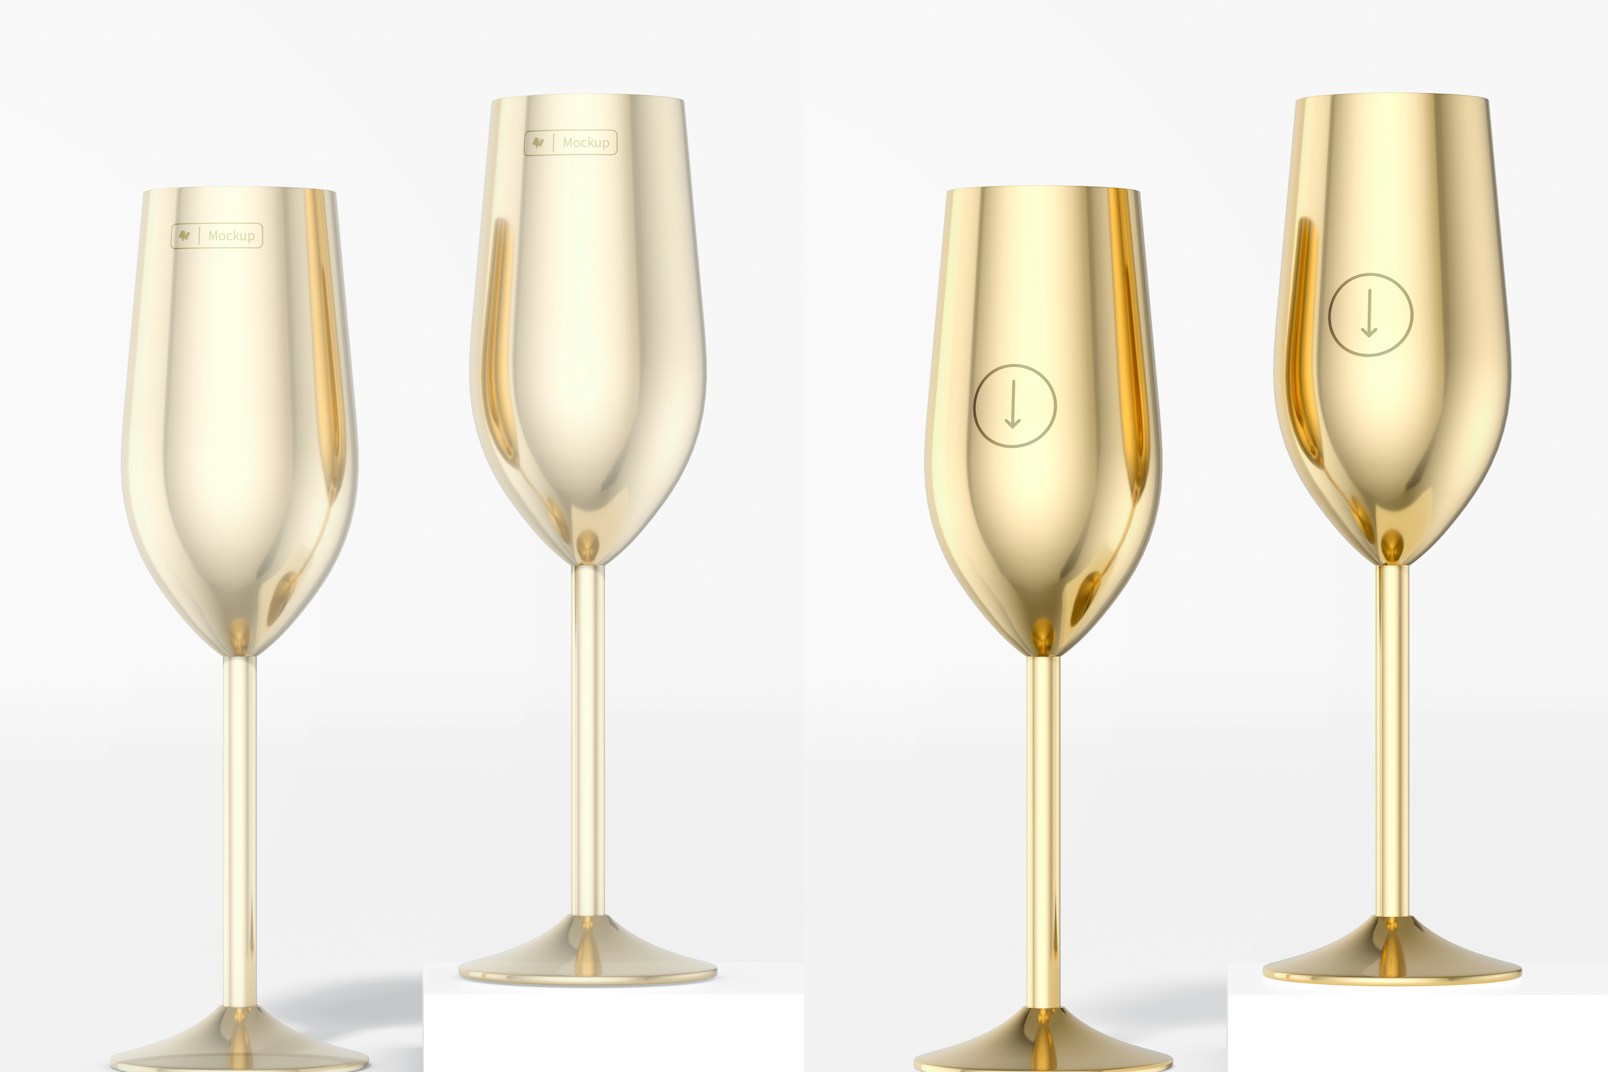 Stainless Steel Champagne Glasses Mockup, Up and Down